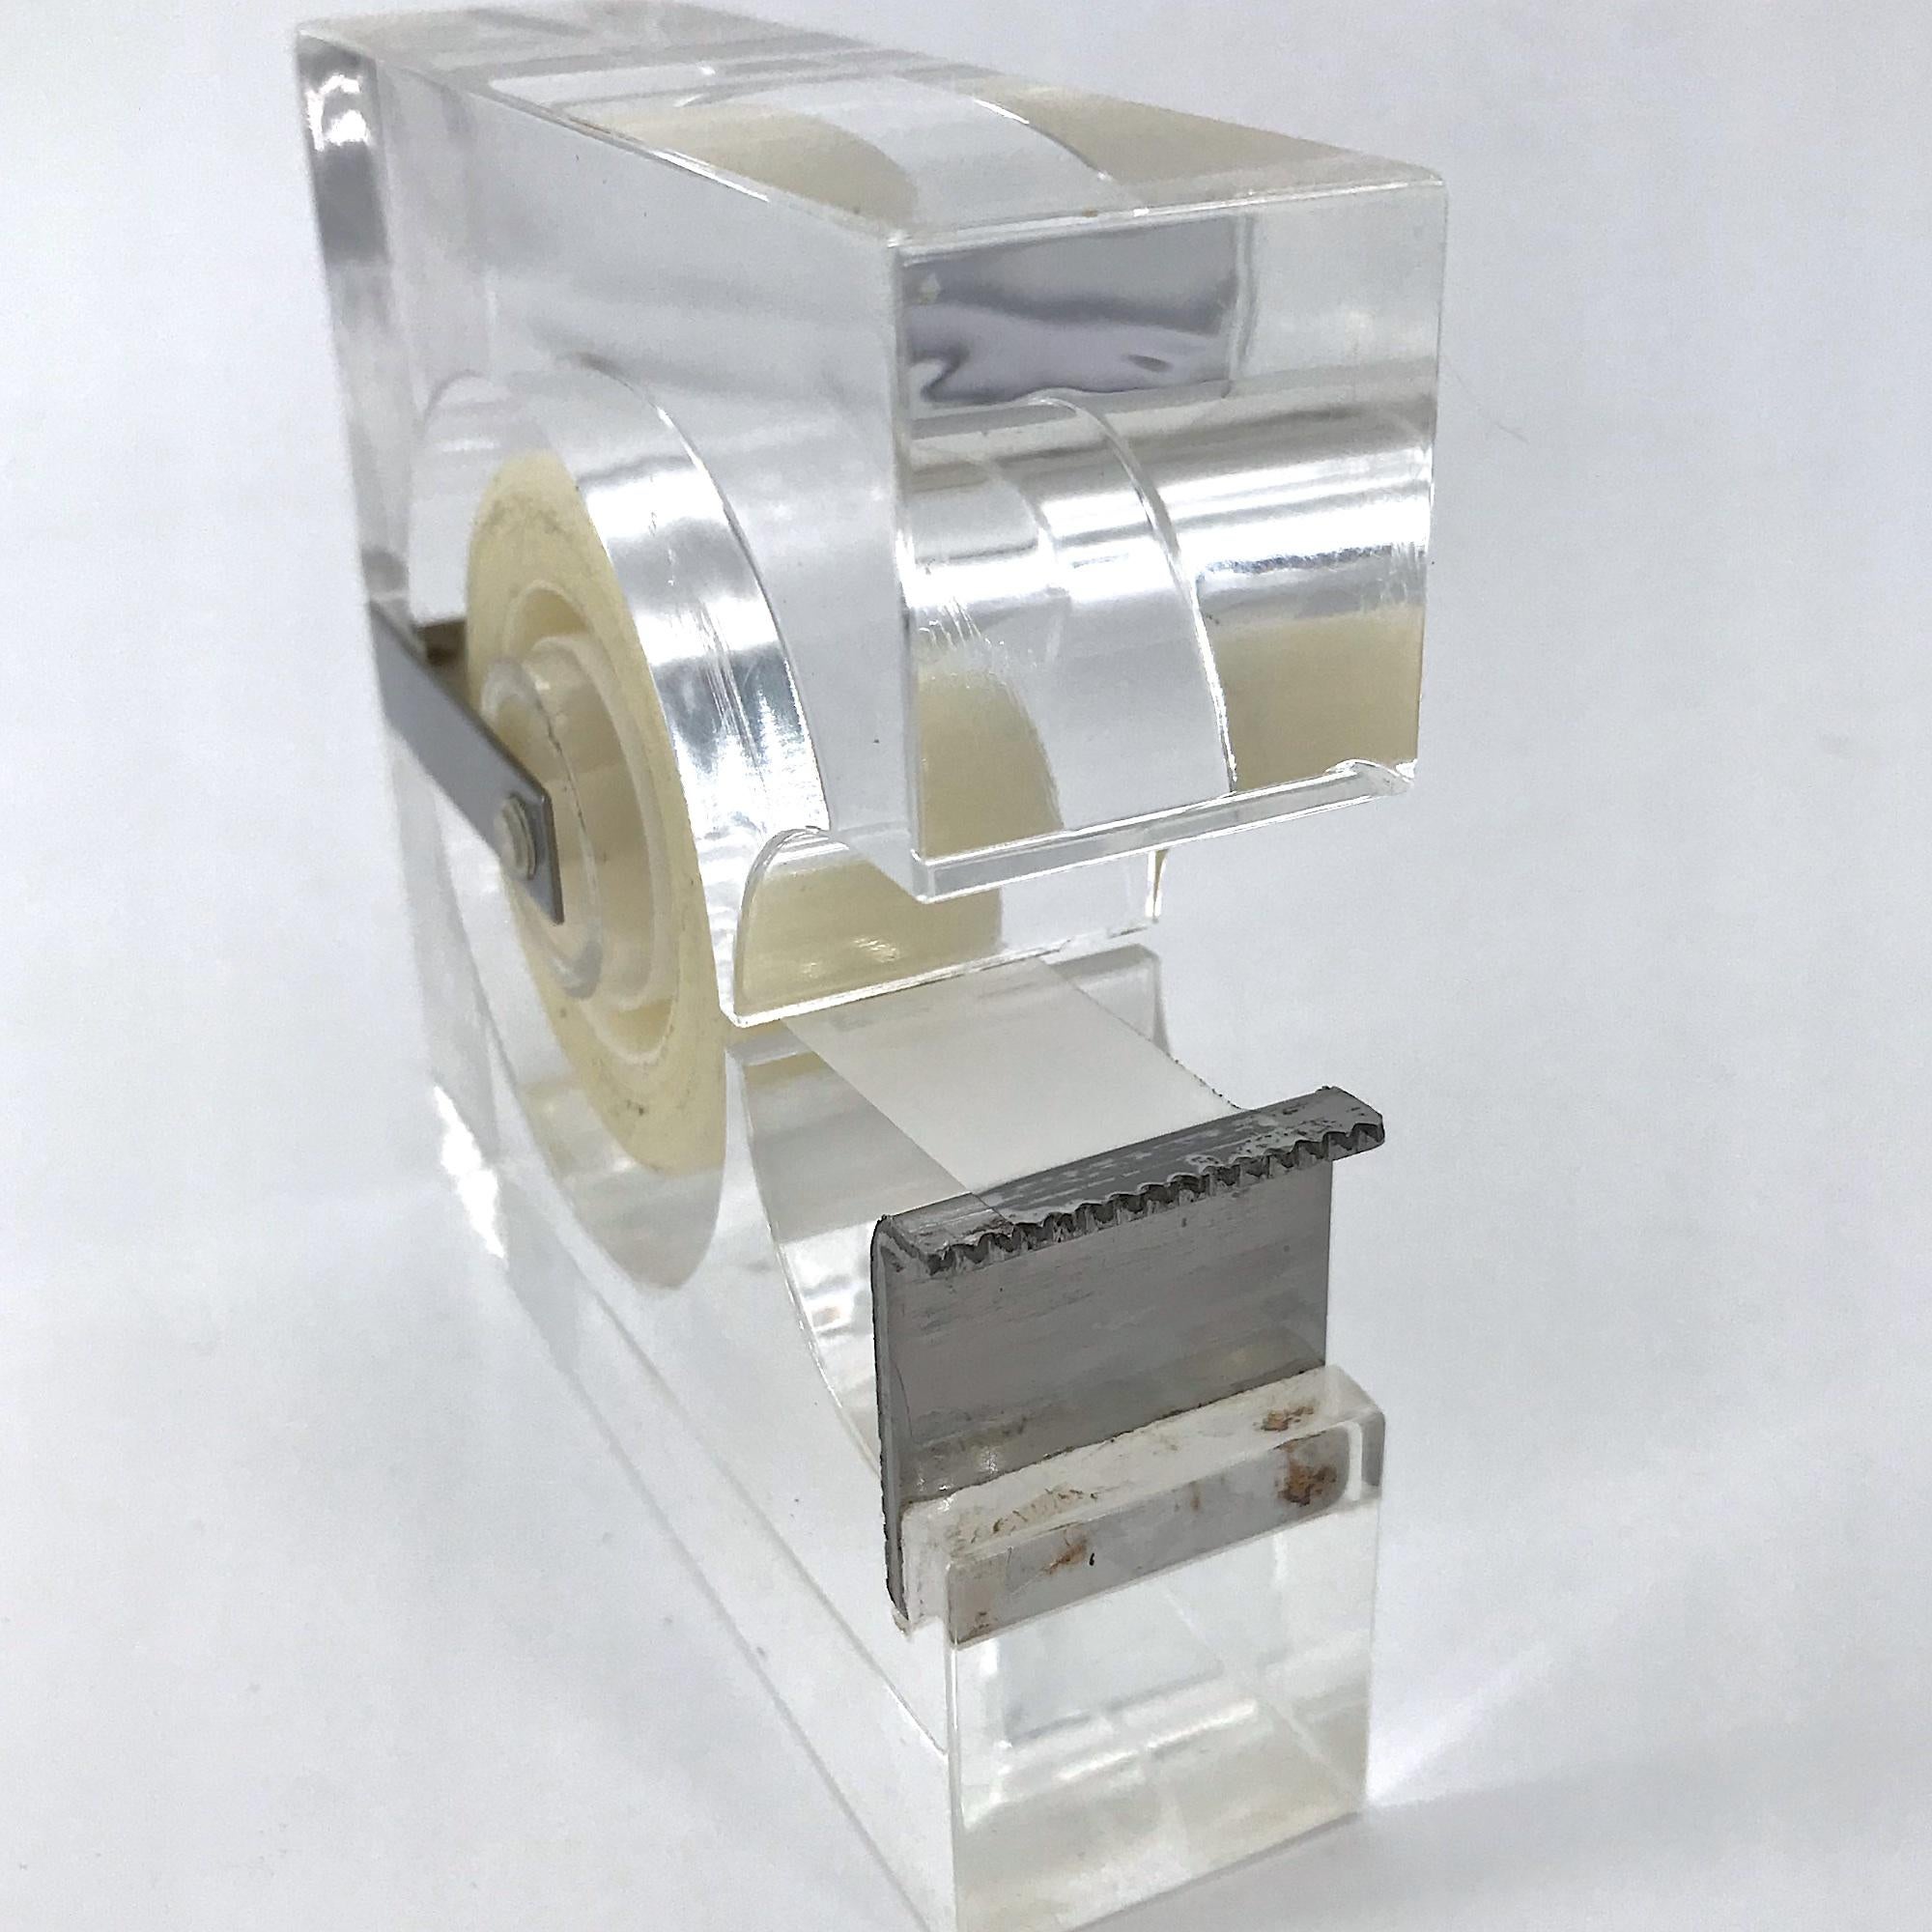 Late 20th Century 1970s Lucite Tape Dispenser by Two's Company for Serge Mansau Paris MOMA Design